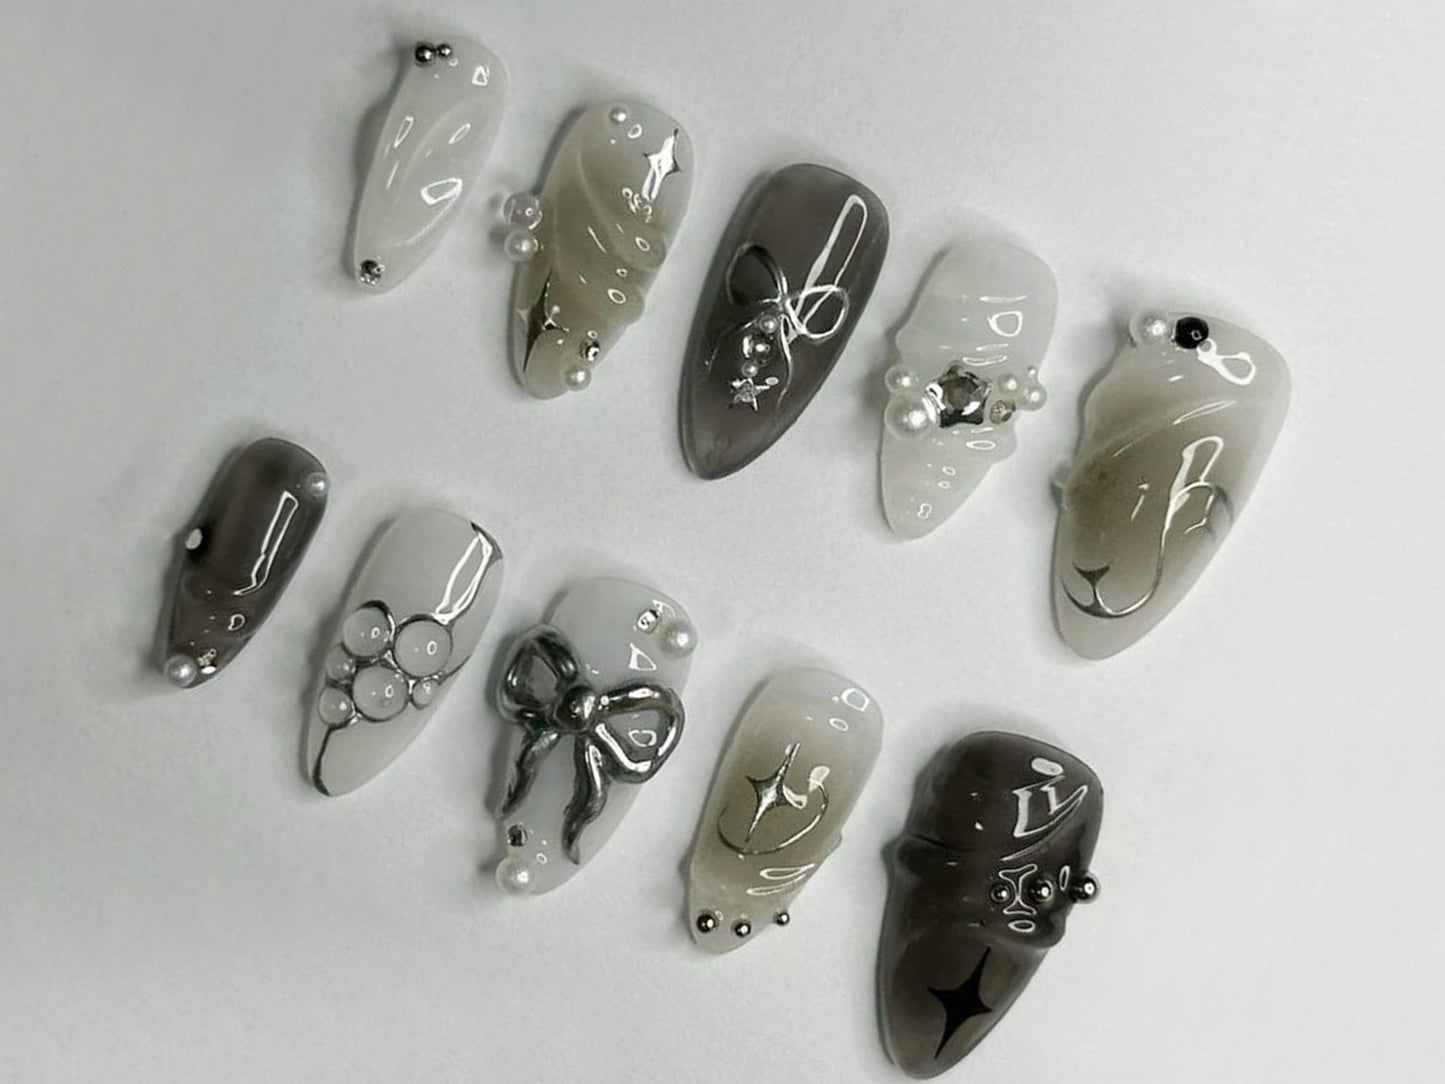 Cool Y2k Press On Nails | Silver-Gray and White 3D Gel Raised Press On Nail Set | Diverse Charms | Nail Art | J18